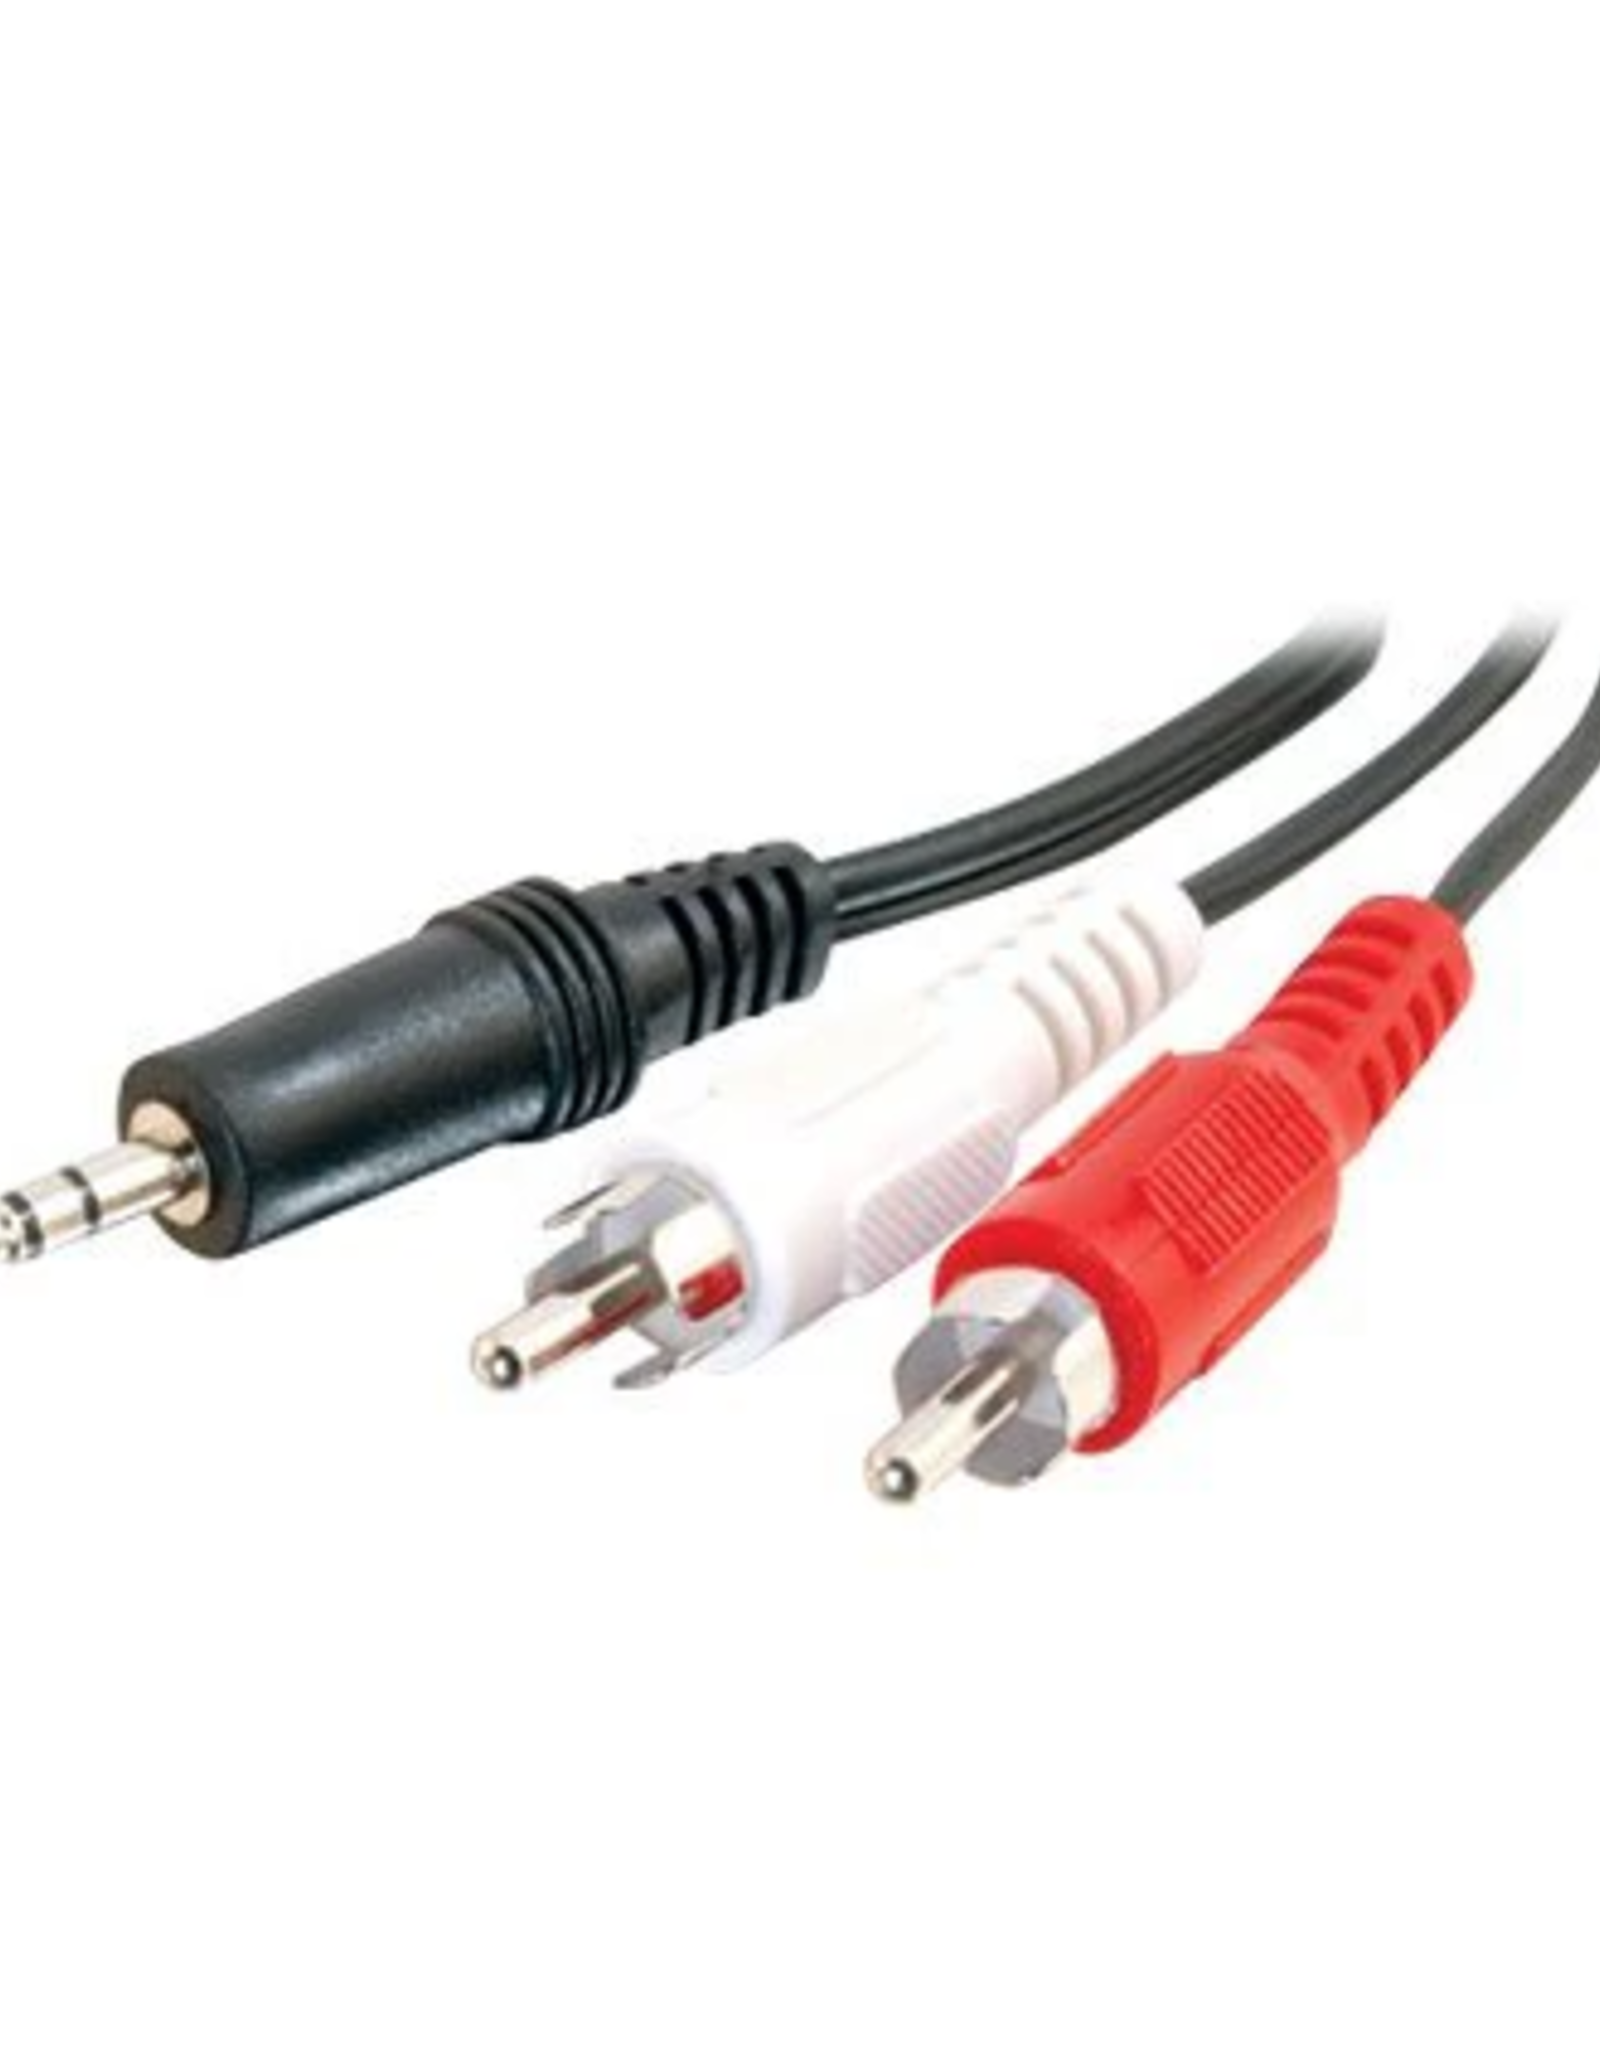 CABLES TO GO STEREO AUDIO Y-CABLE 3.5MM (M) TO 2 RCA (M) 6FT